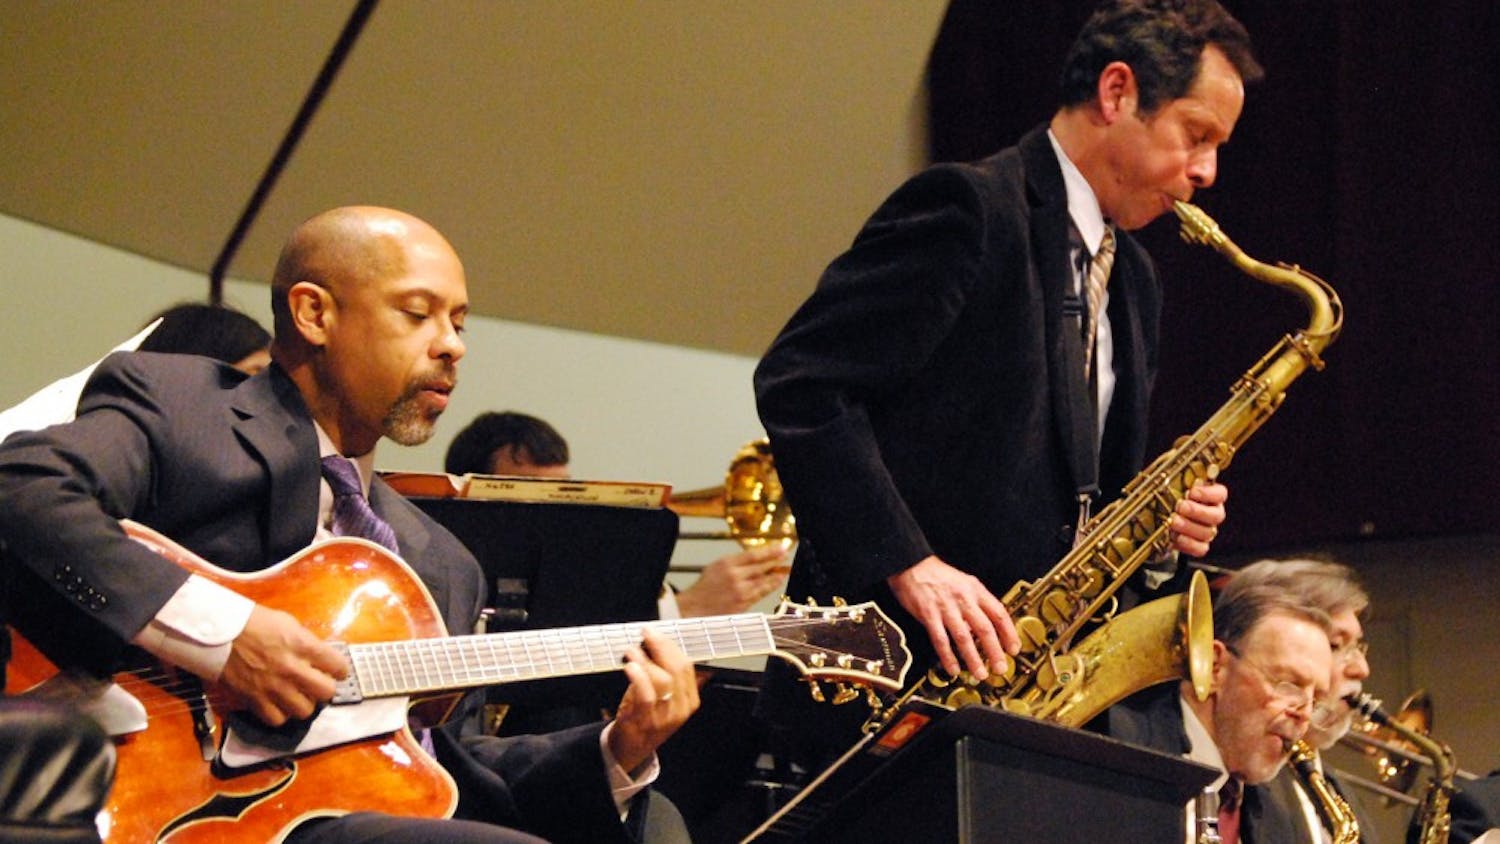  The 36th Carolina Jazz Festival Tuesday night at 7:30 in Hill Hall Auditorium. The concert featured jazz music through the past century. 
Guitarist Baron Tymas 